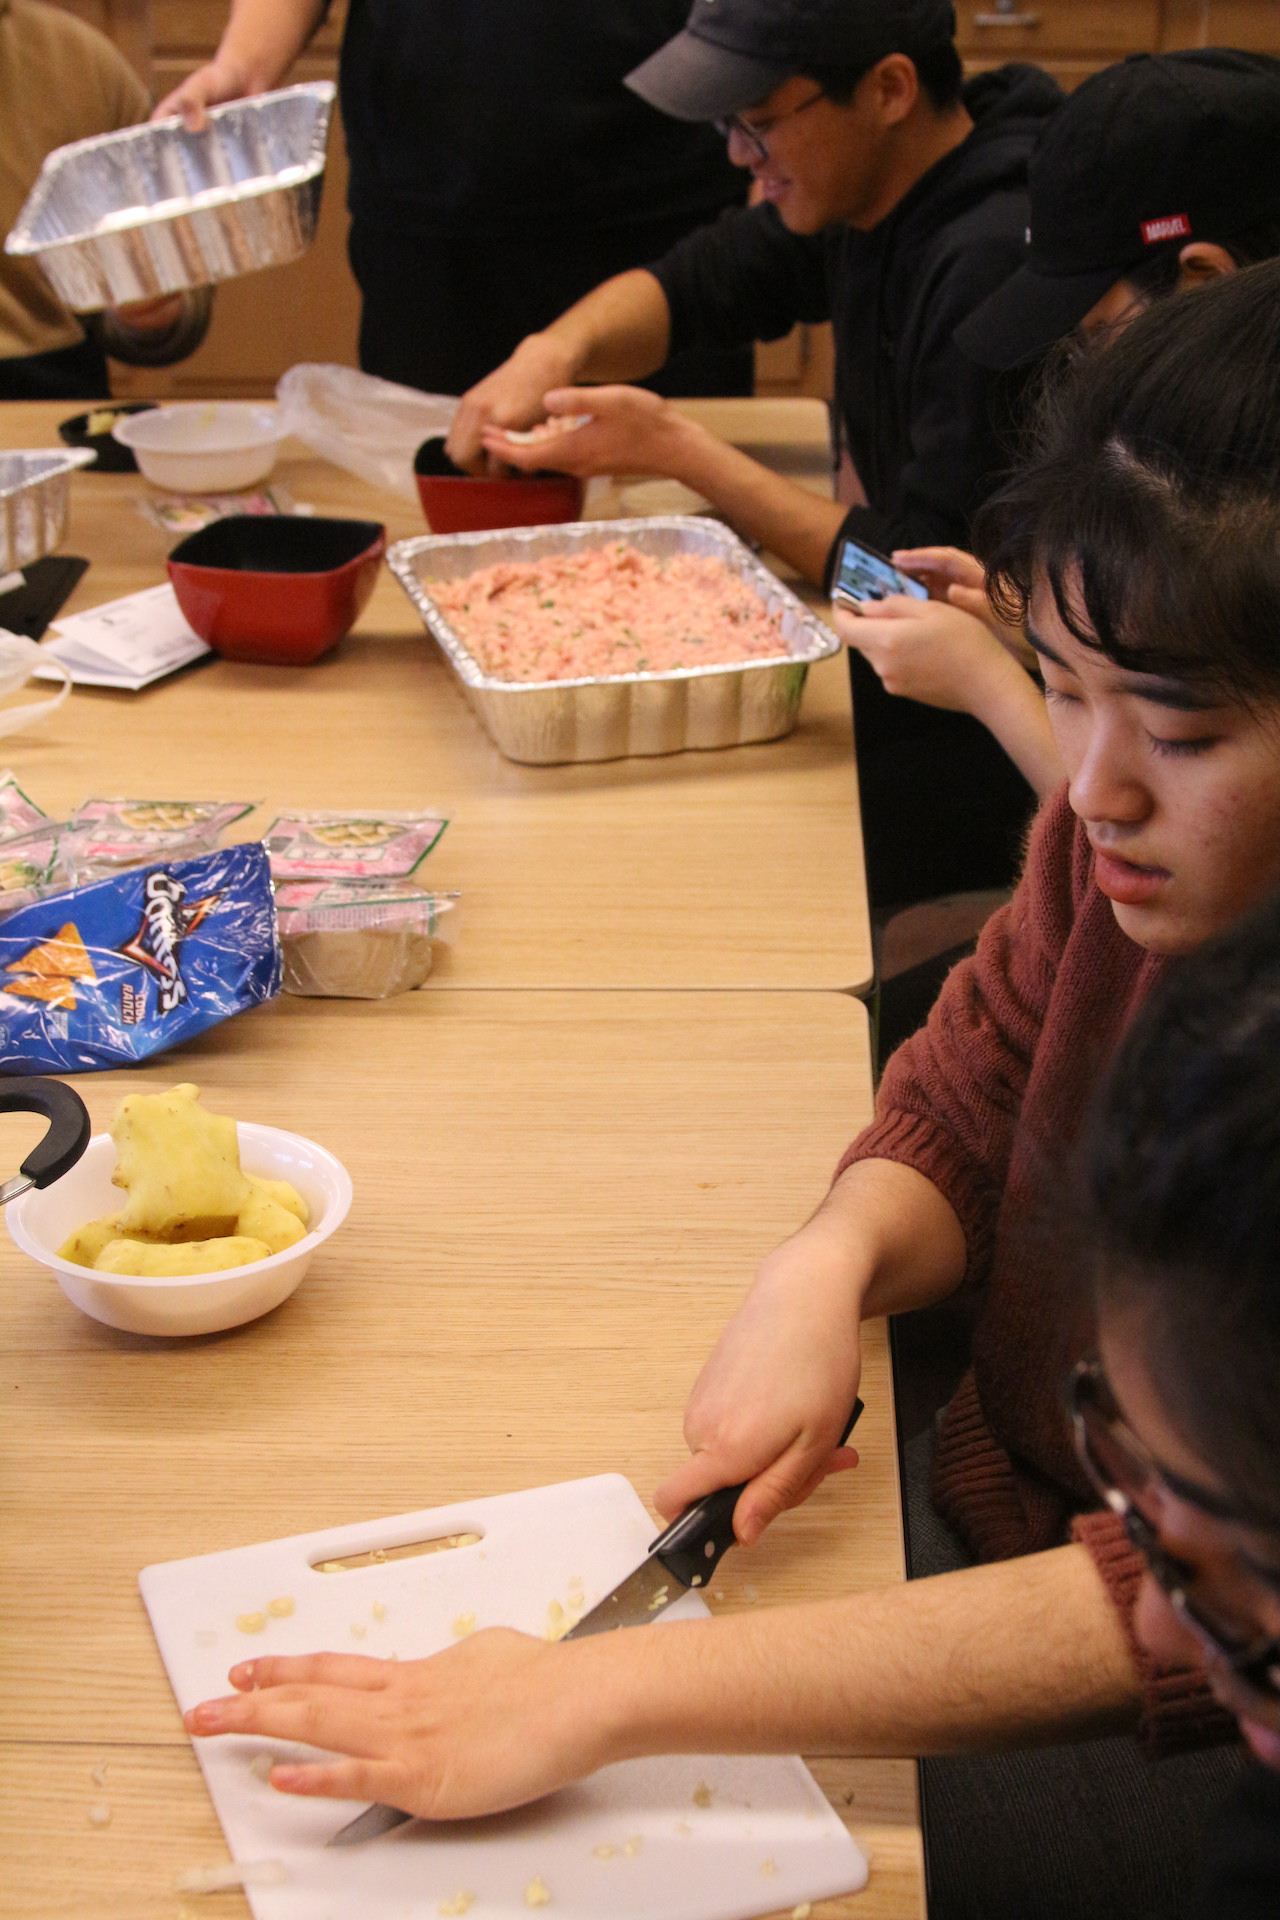 Dali Rodriguez and other students chop up ingredients for dumplings